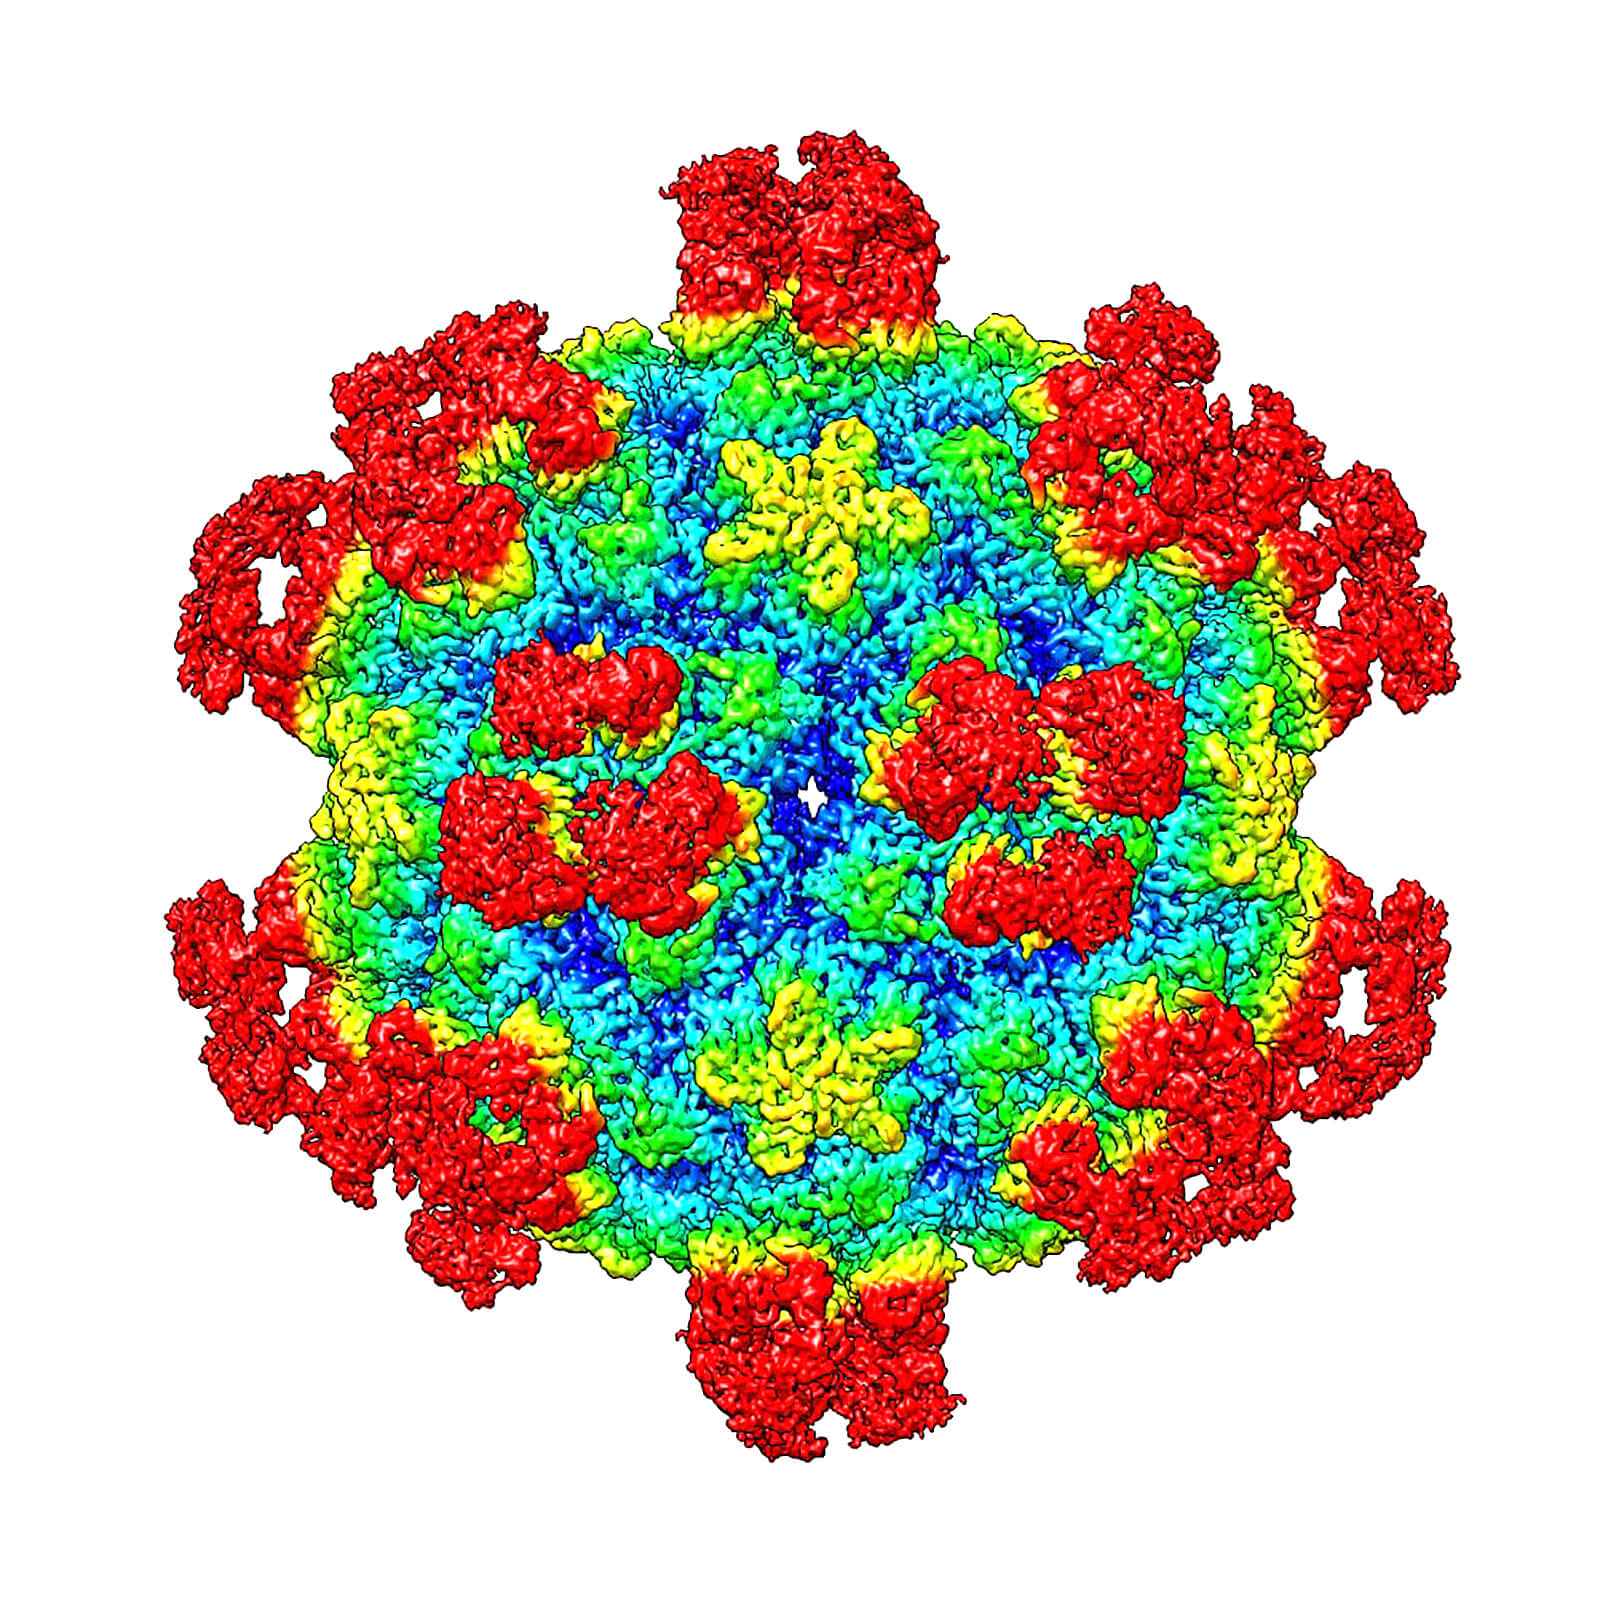 New Mechanism To Destroy Viruses Could Lead To Future Therapies Purdue University News